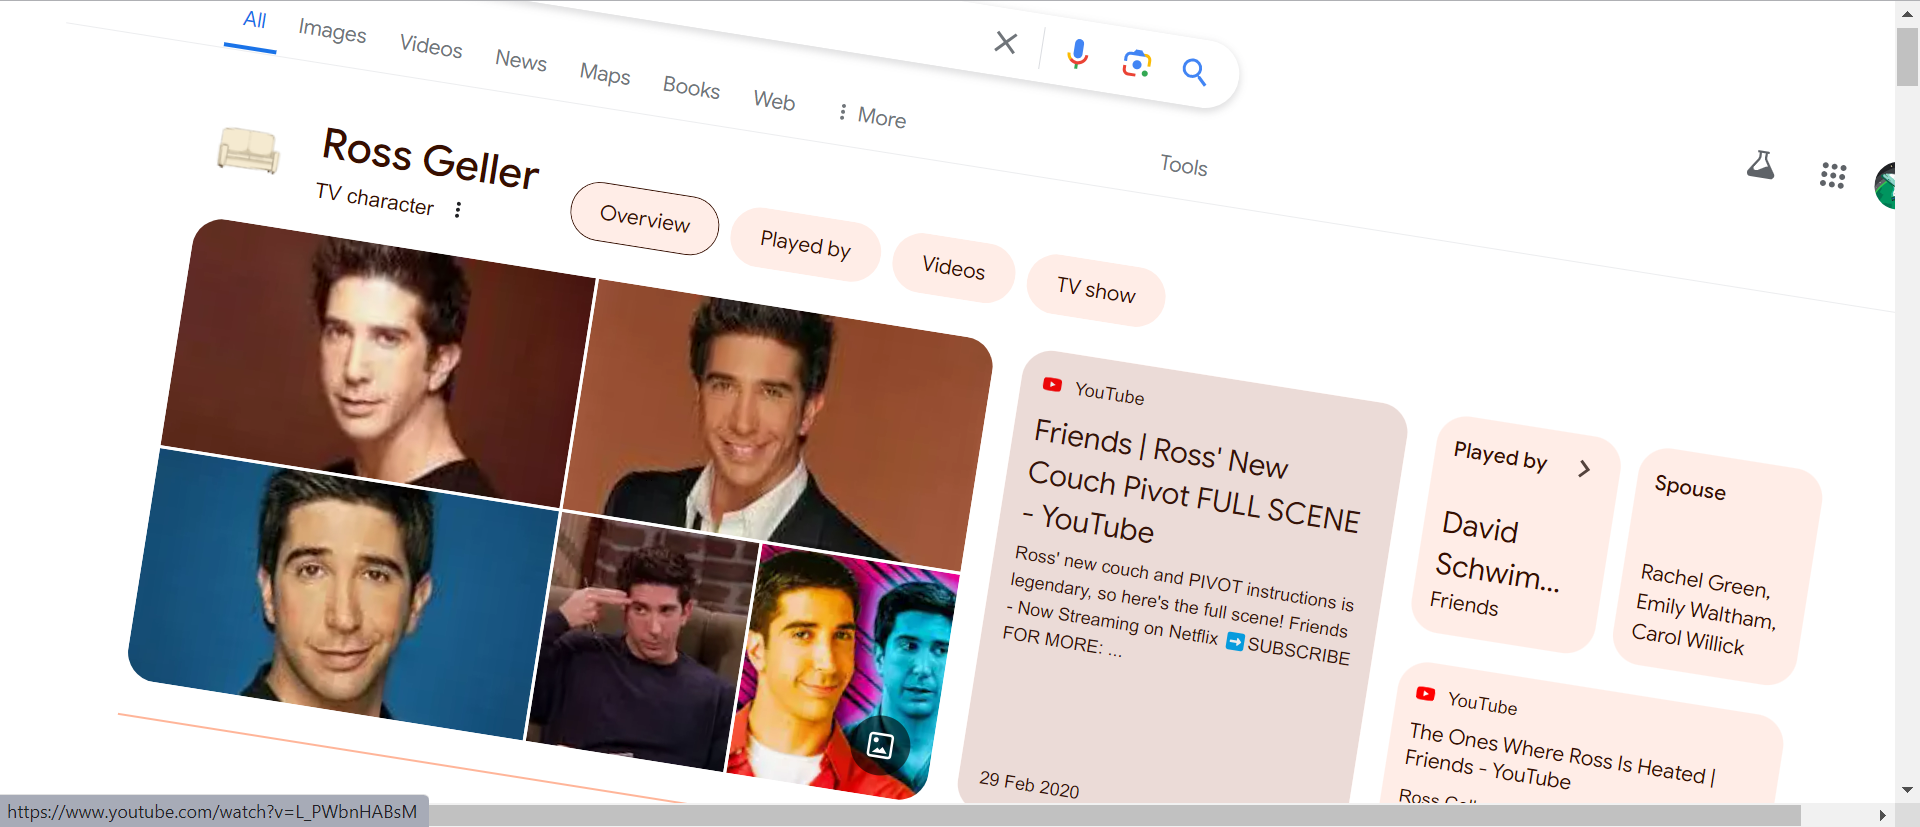 The Google Search Result pagefor Ross Geller